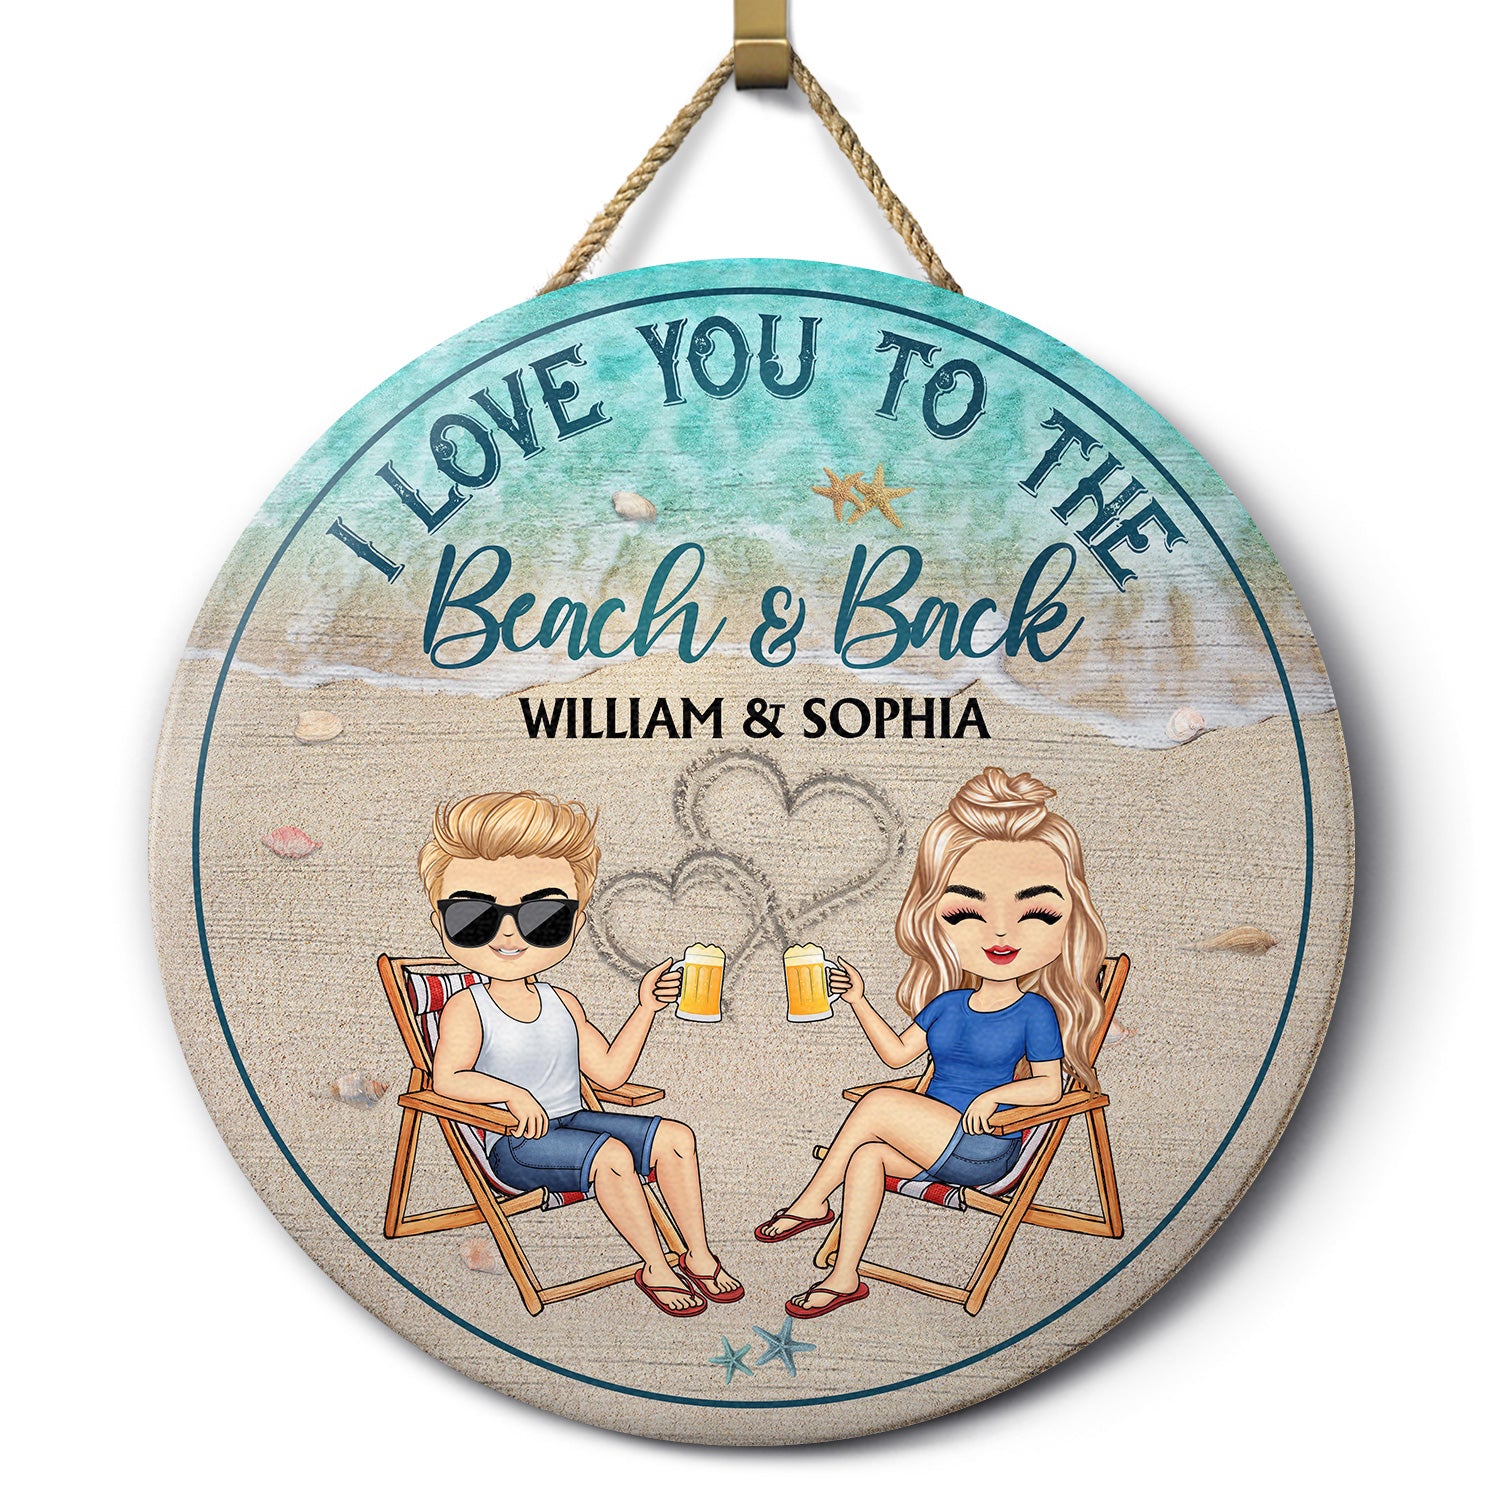 I Love You To The Beach And Back - Home Decor, Backyard Decor, Gift For Couples, Husband, Wife - Personalized Custom Wood Circle Sign